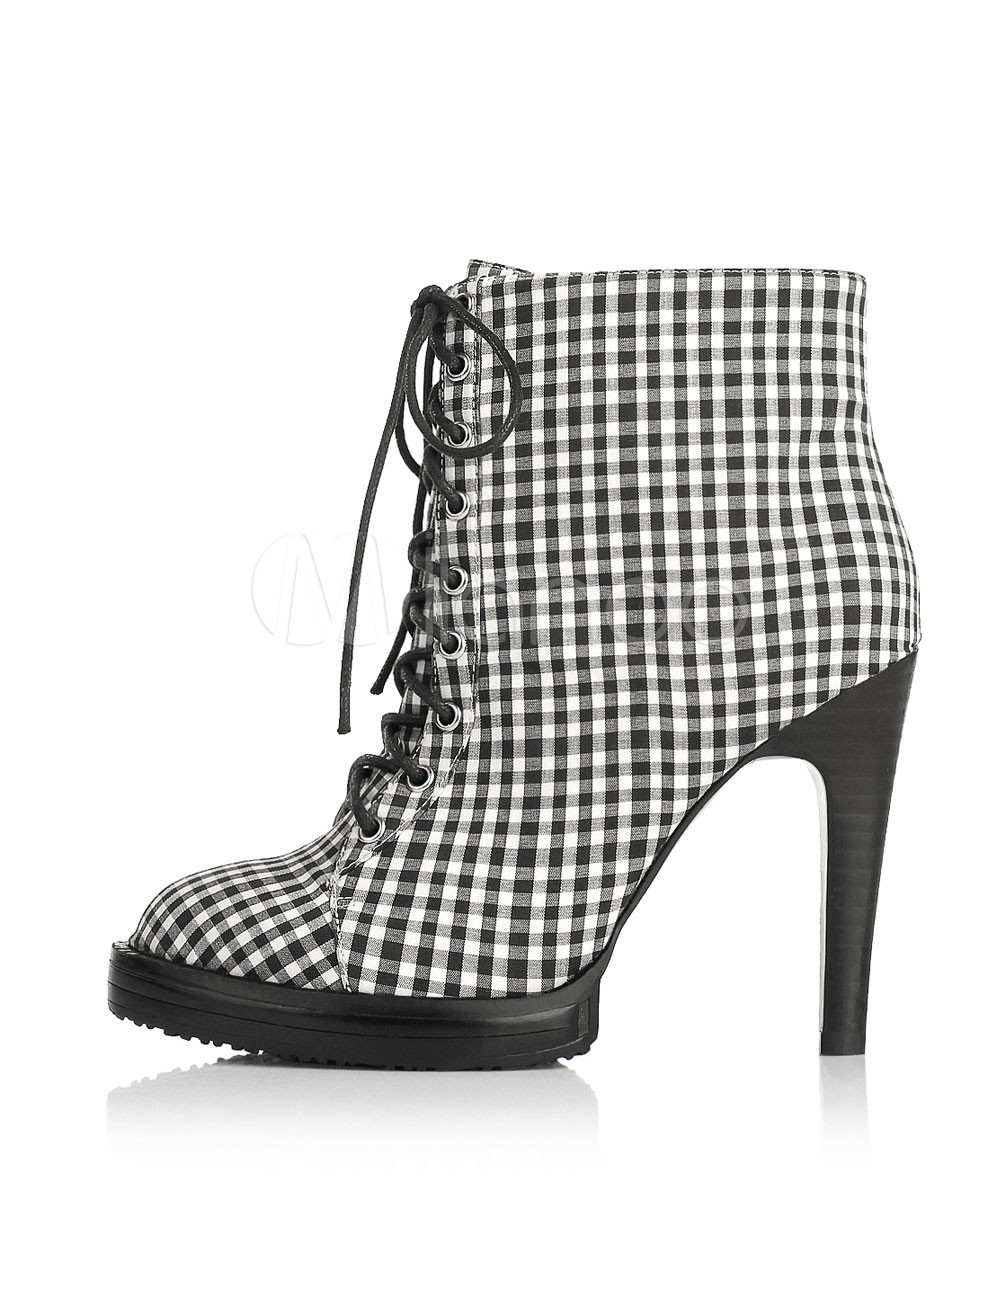 black and white plaid booties